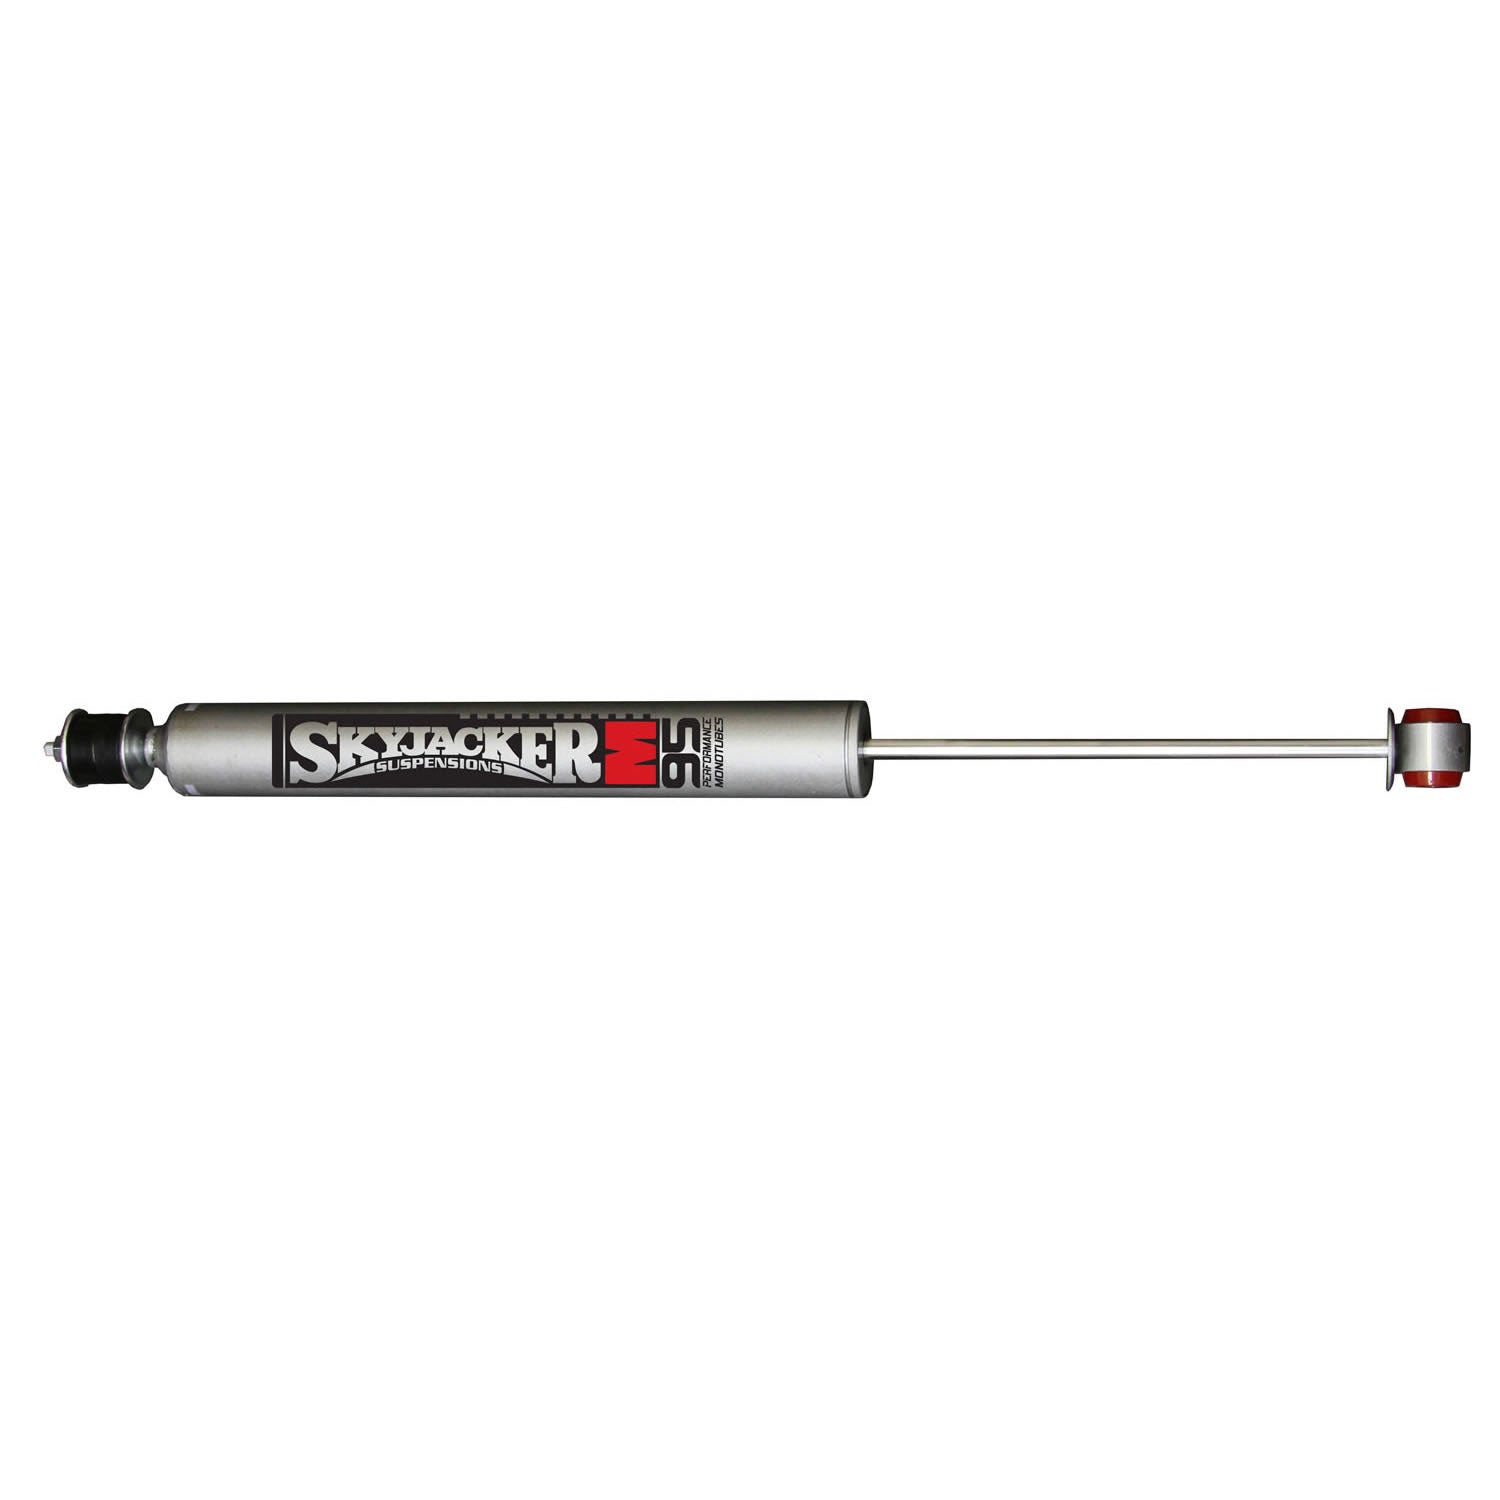 M95 Performance Monotube Shock Absorber 94-10 RAM 05-18 Super Duty 24.63 Inch Extended 14.75 Inch Collapsed Skyjacker